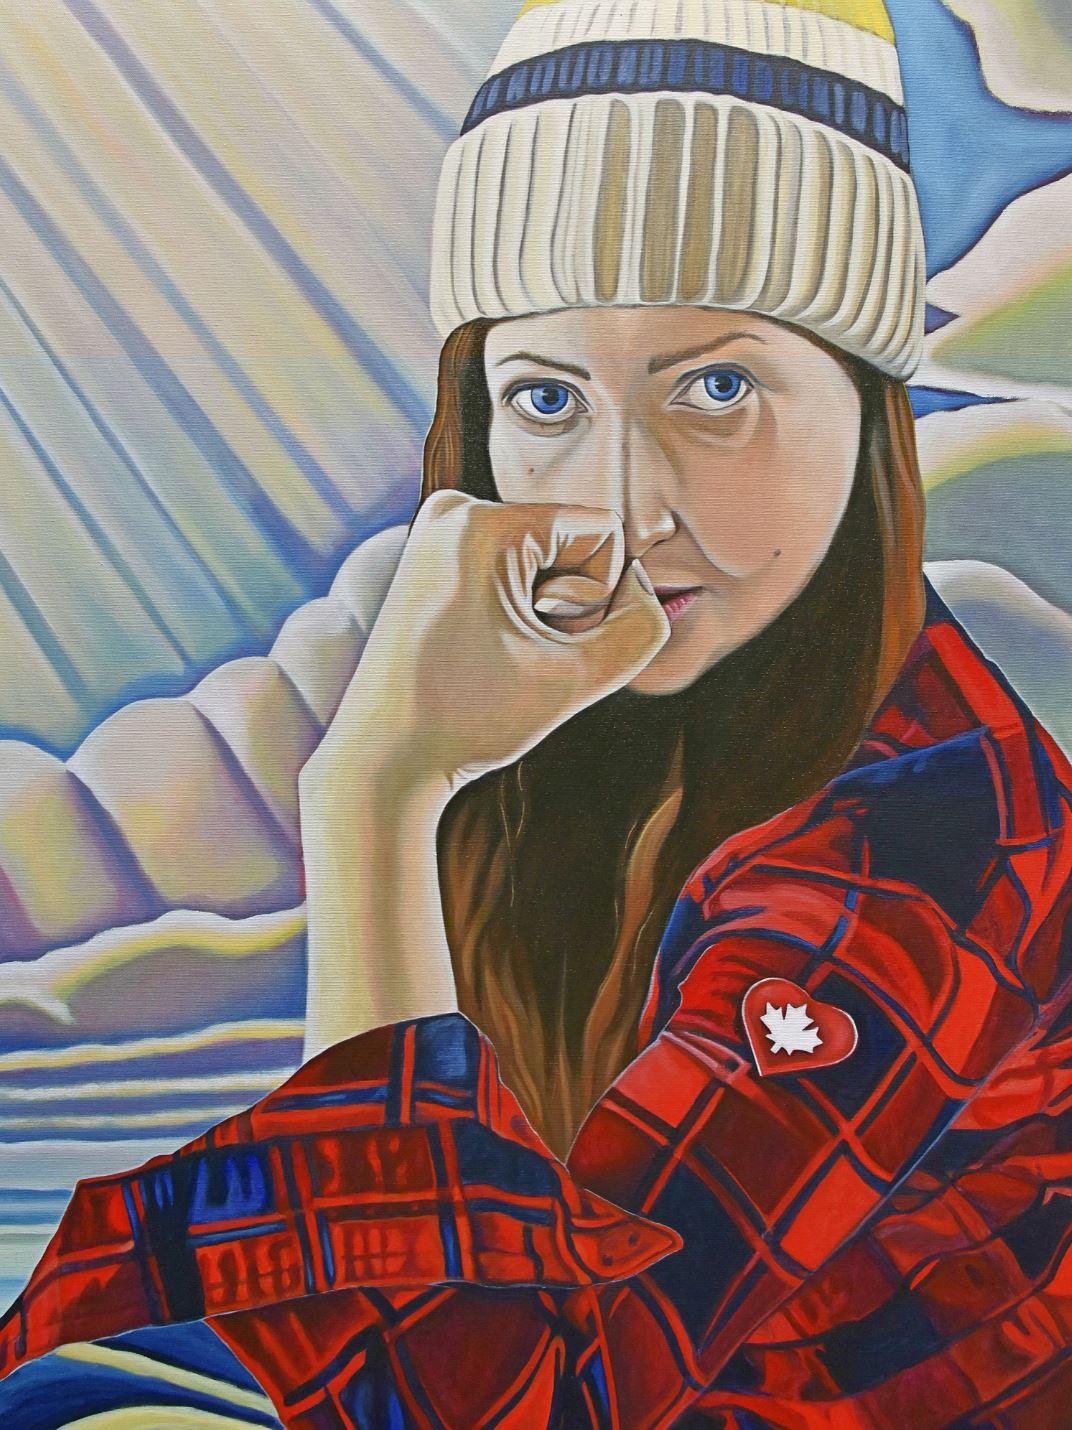 Canadian pop art painting showing toque and plaid shirt